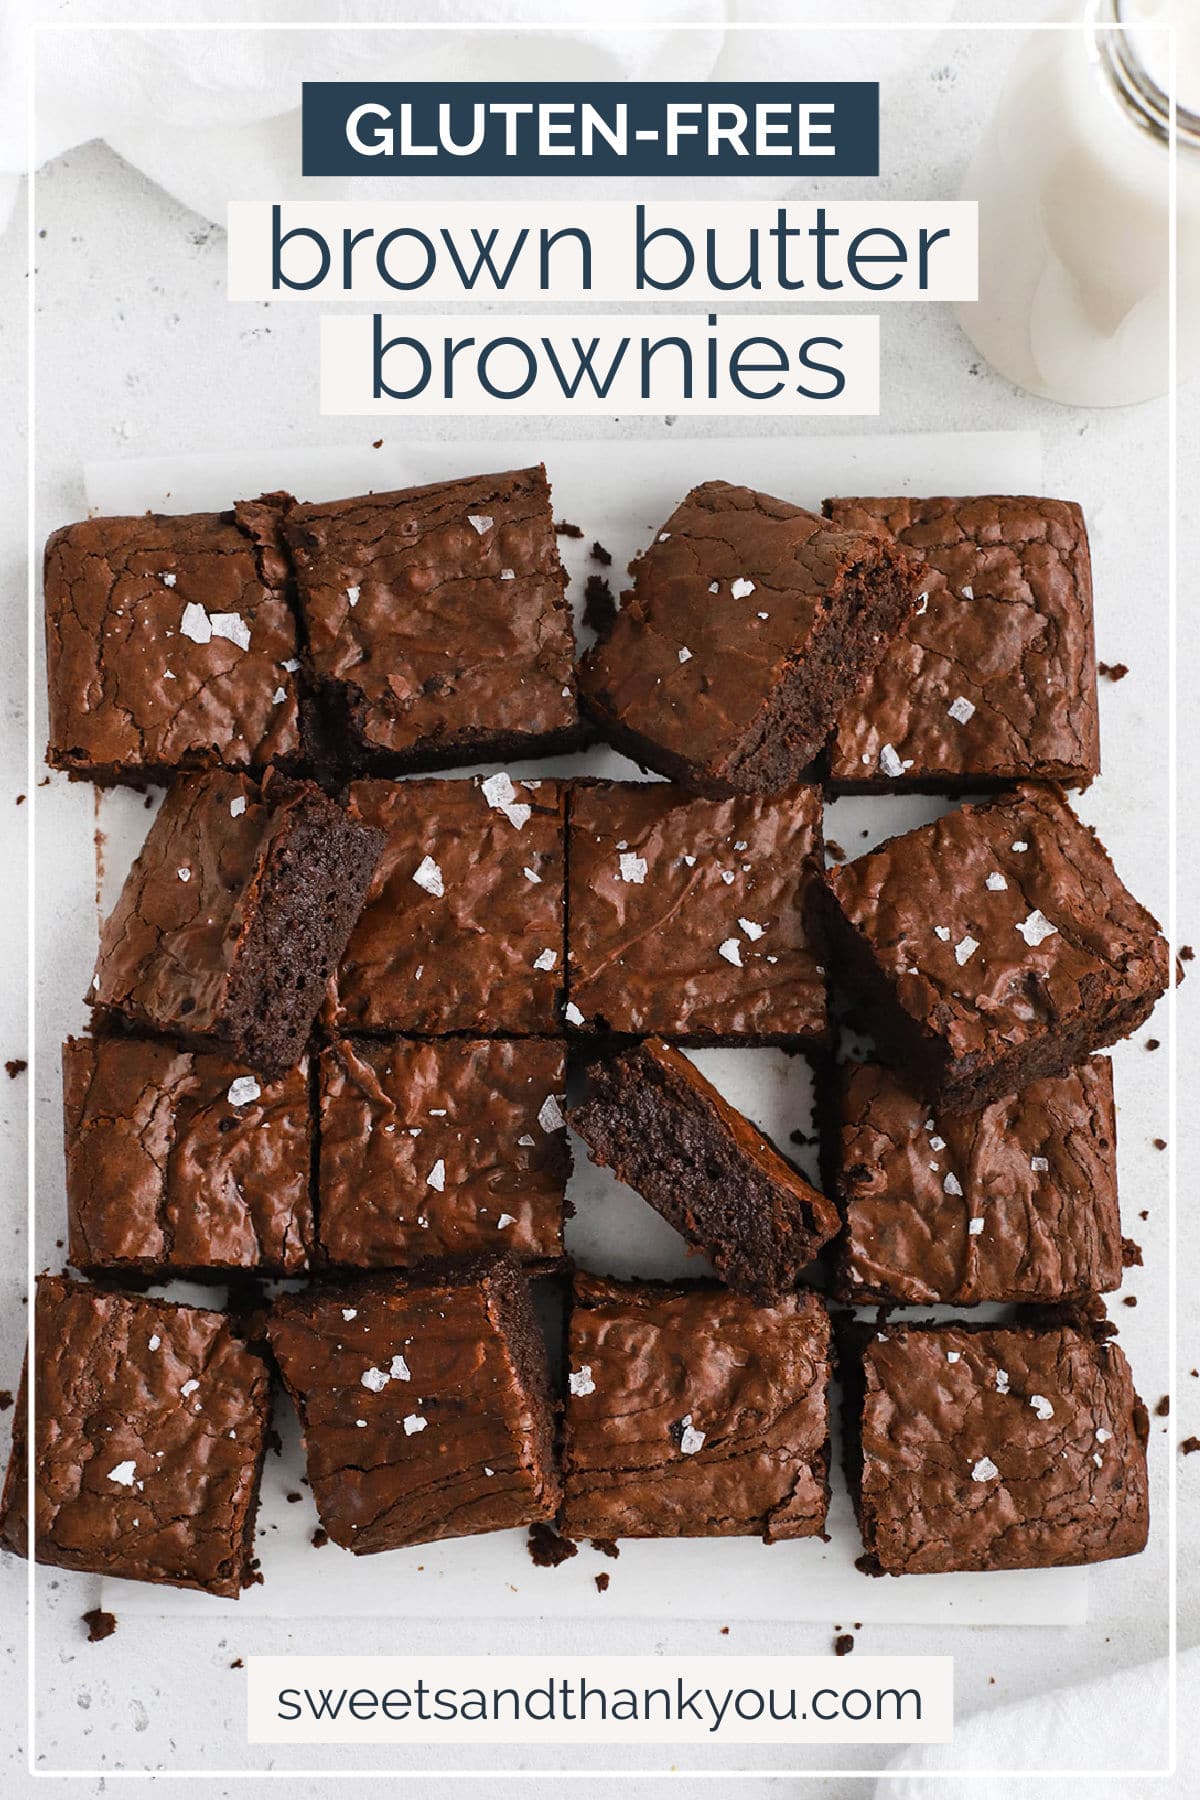 Gluten-Free Brown Butter Brownies - Fudgy gluten-free brownies that are perfect for a cozy day or chocolate craving. // Brown Butter Brownie Recipe // Gluten Free Brownies // Gluten-Free Baking #glutenfree #brownies #brownbutter #brownbutterbrownies #glutenfreebrownies #chocolate